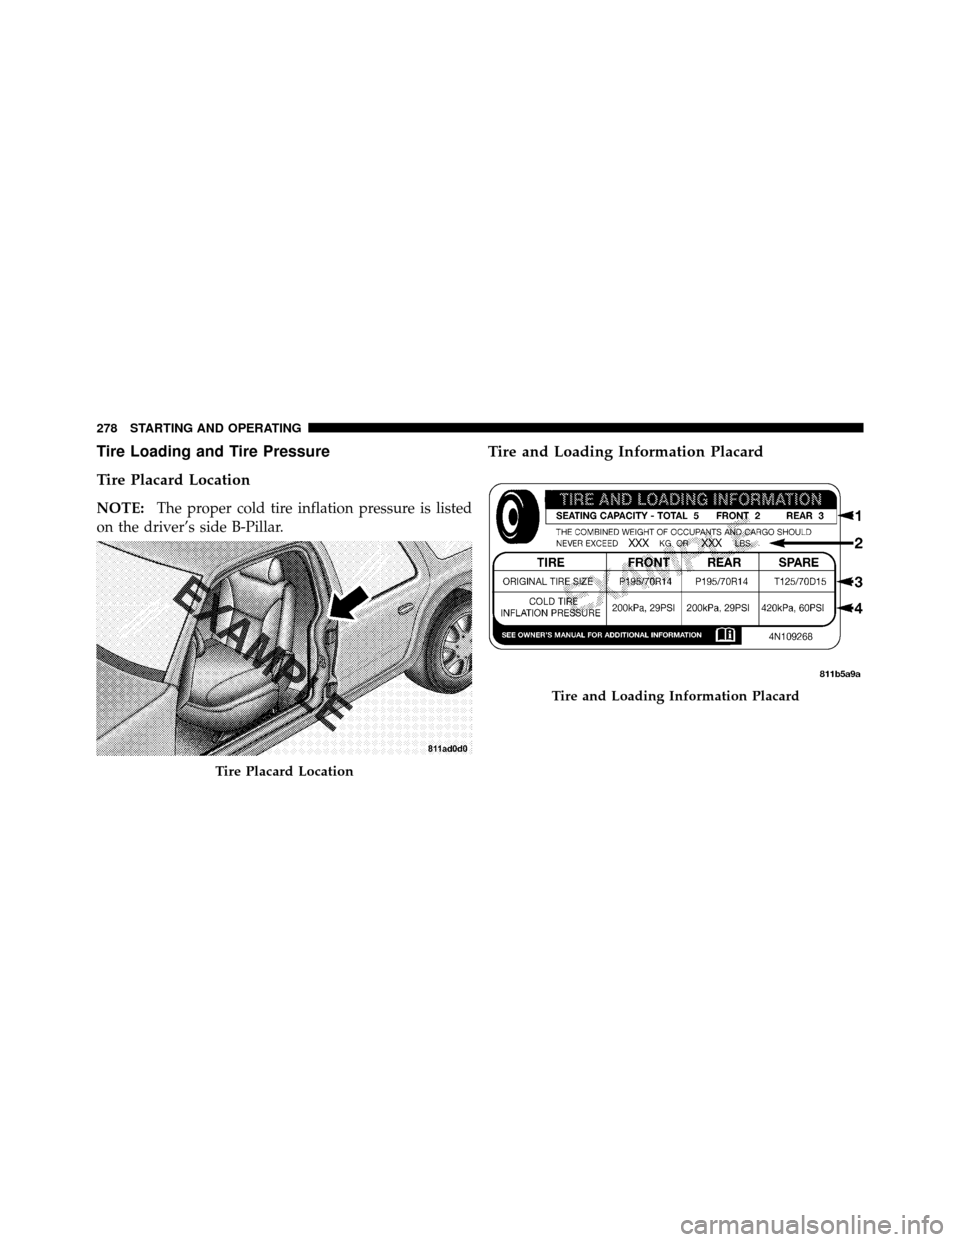 DODGE AVENGER 2010 2.G Owners Manual Tire Loading and Tire Pressure
Tire Placard Location
NOTE:The proper cold tire inflation pressure is listed
on the driver’s side B-Pillar.
Tire and Loading Information Placard
Tire Placard Location
